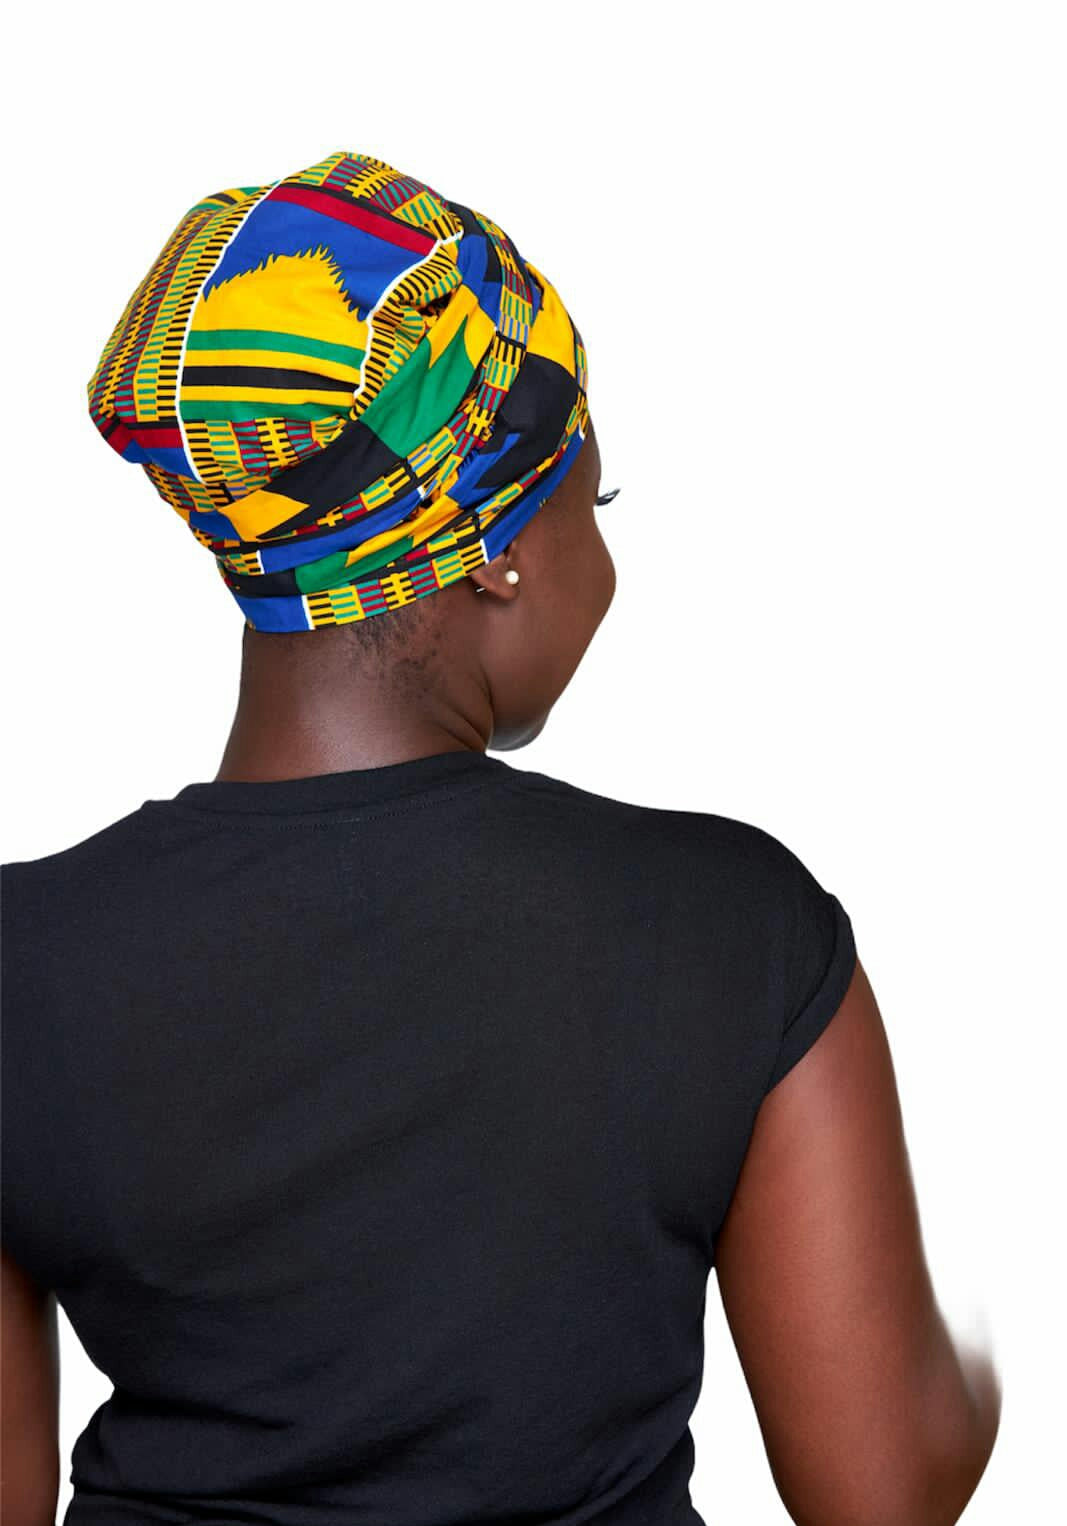 A Ghanaian Kente Wax Print Made of Blue, Green, Red ,Black and White Blended Beautiful Colours And Pattern, Hand Made Elastic Silklined Bonnet With Band